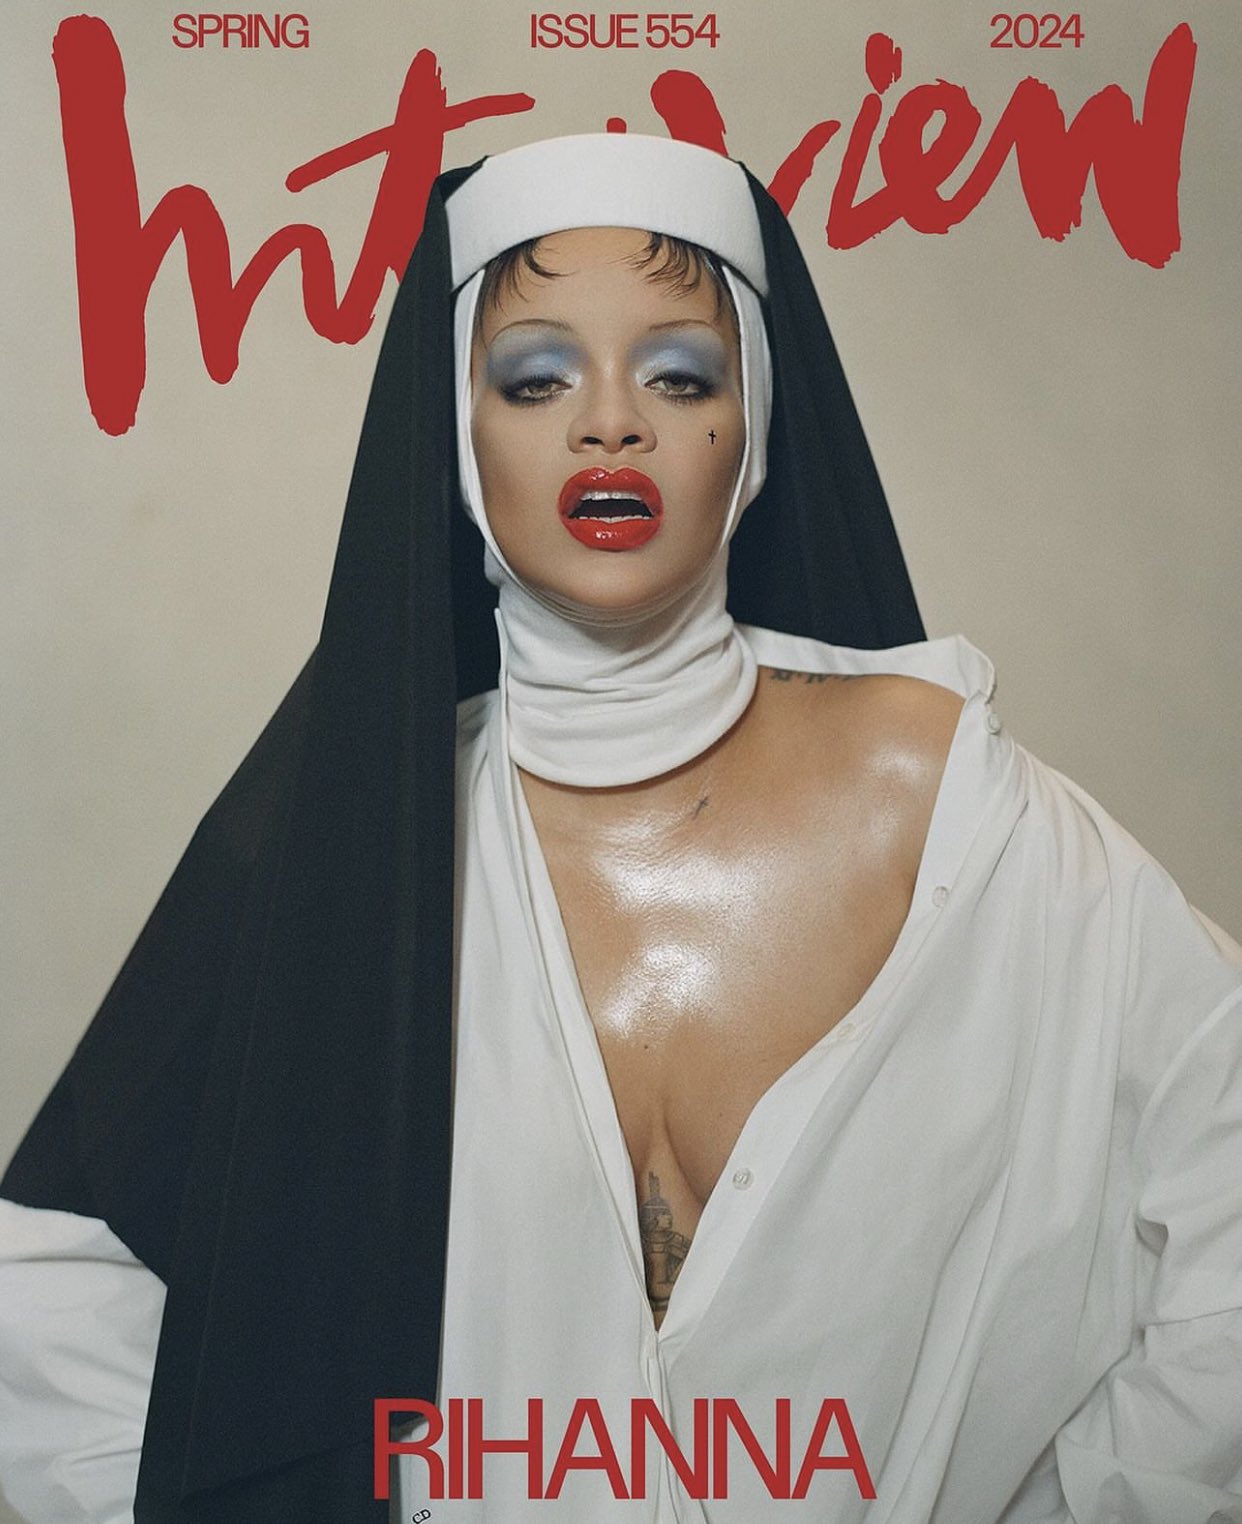 Interview – Spring 2024 cover story featuring Rihanna, by Nadia Lee Cohen.